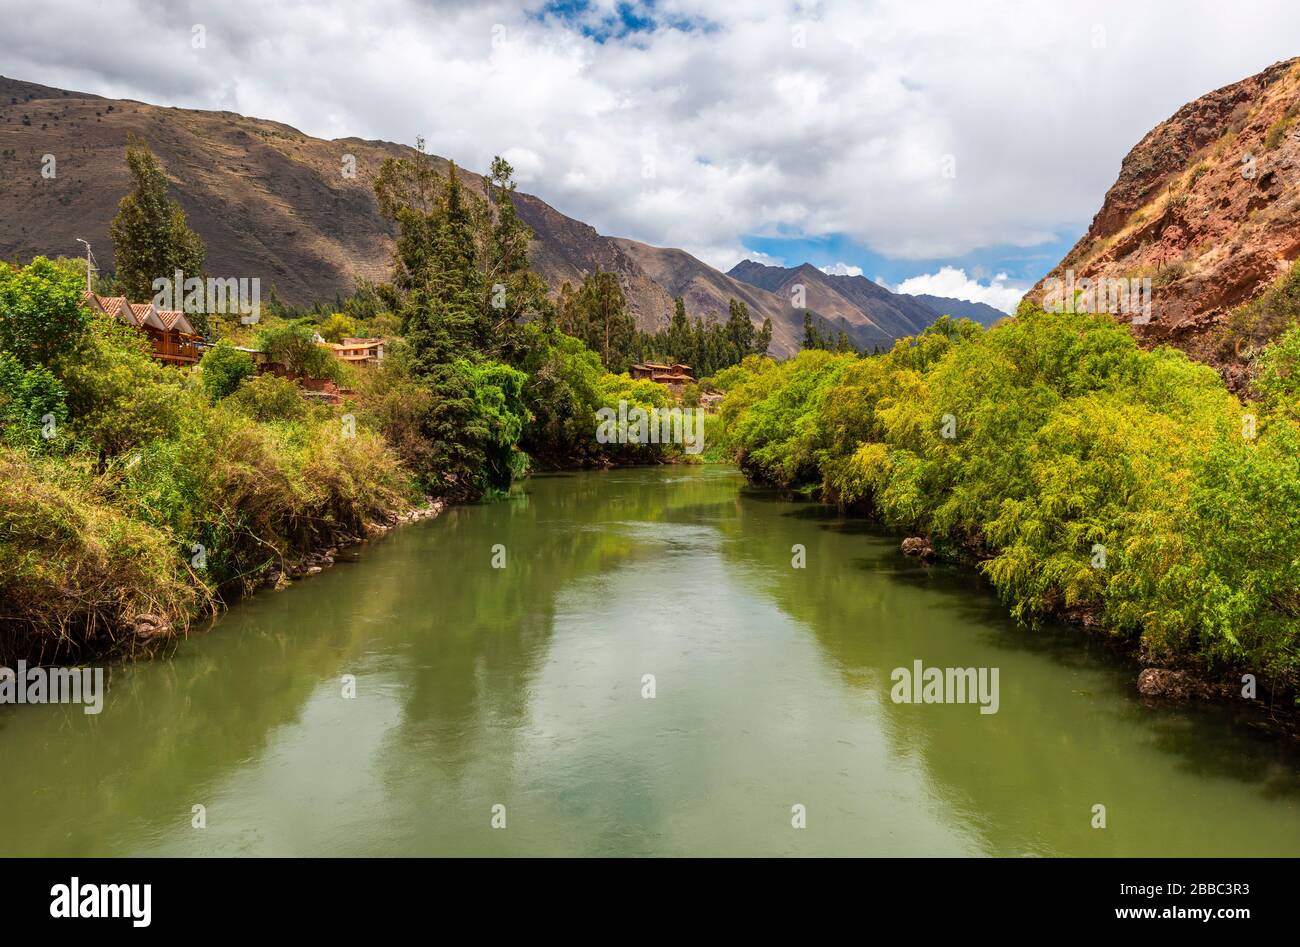 The majestic Urubamba river in the Sacred Valley of the Inca, Cusco Province, Peru. Stock Photo